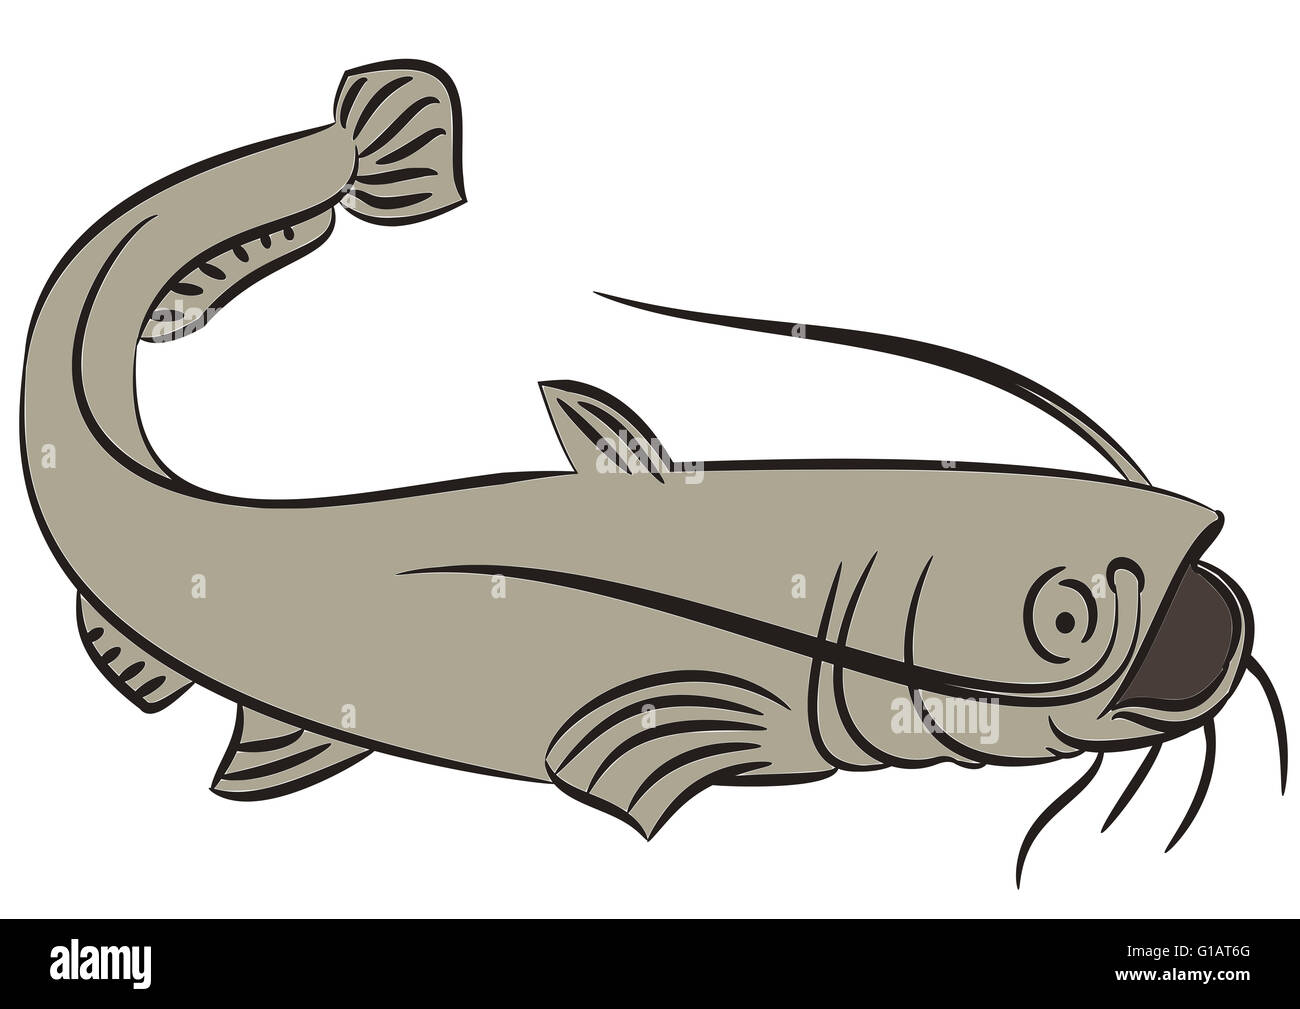 Line drawing of a catfish on a white background Stock Photo - Alamy